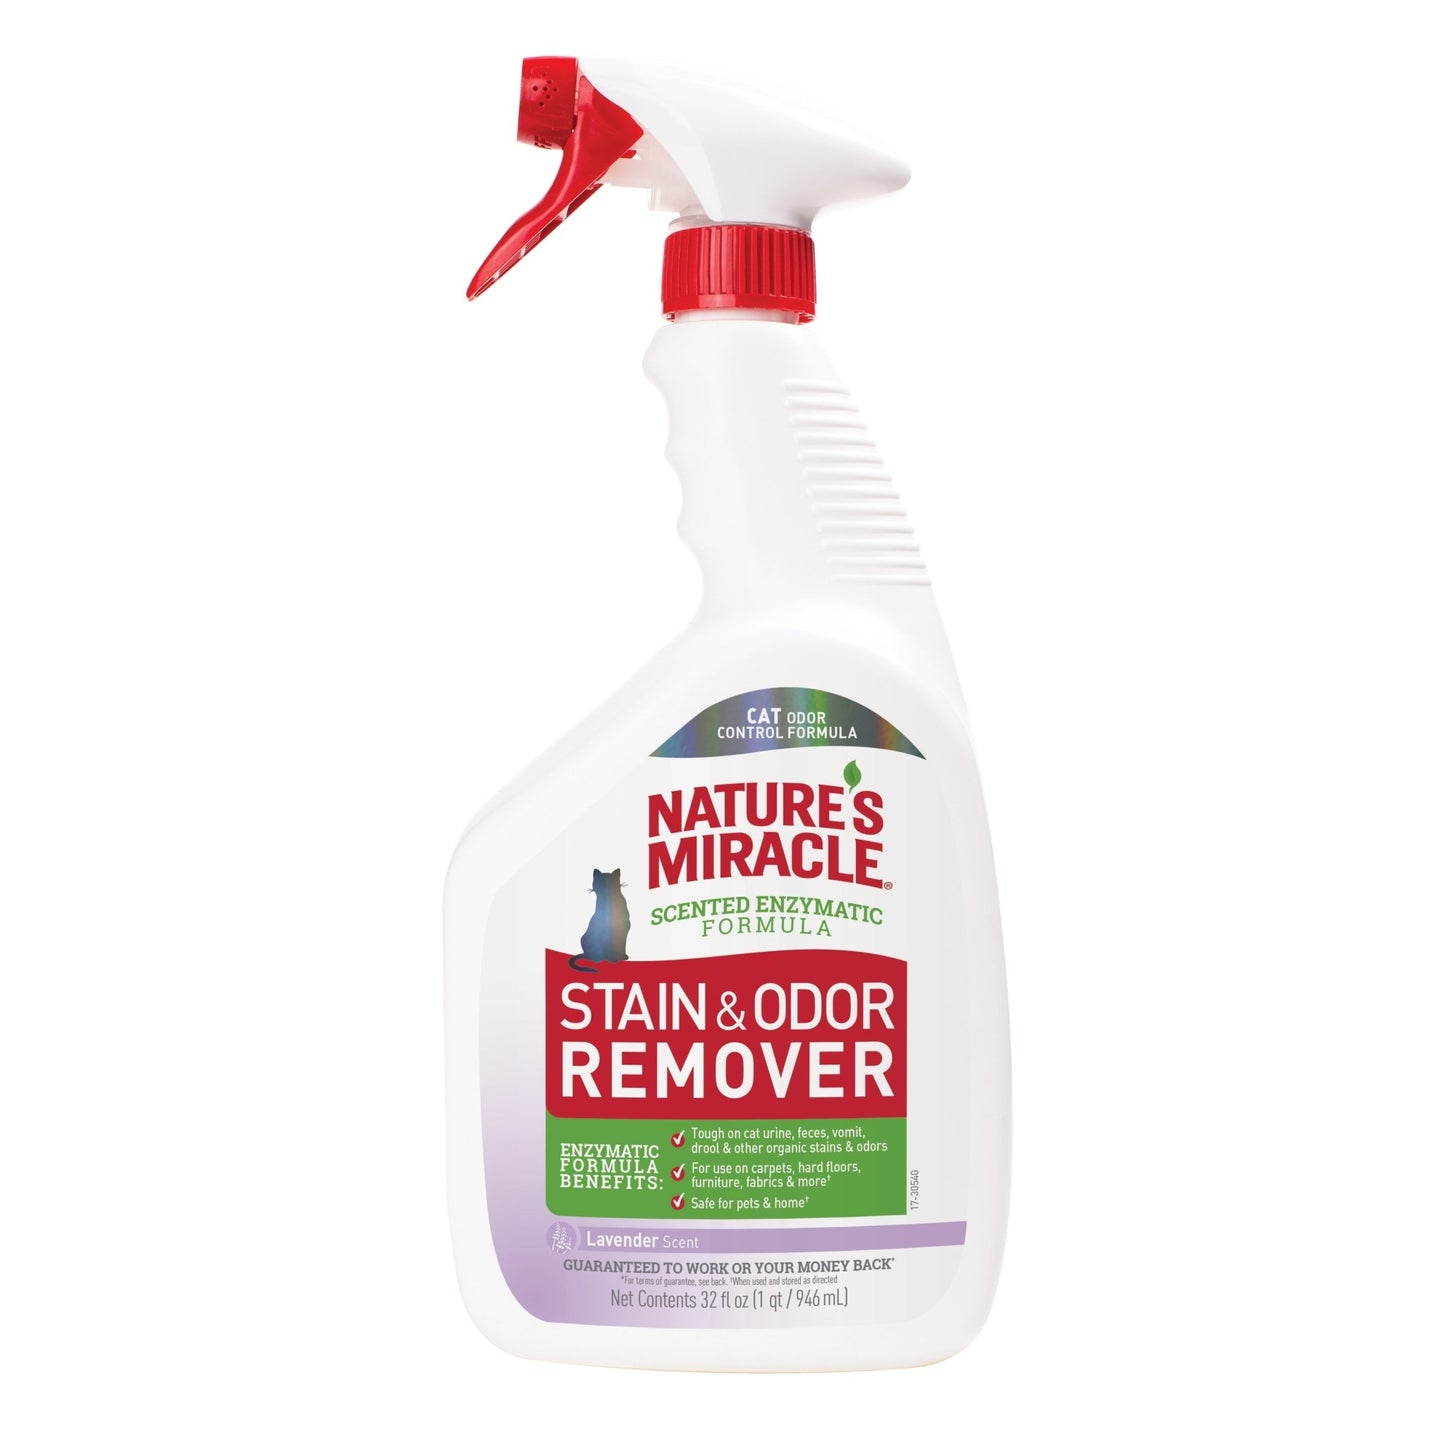 Natures Miracle Stain Odour Remover Lavender For Cats 946ml - Woonona Petfood & Produce